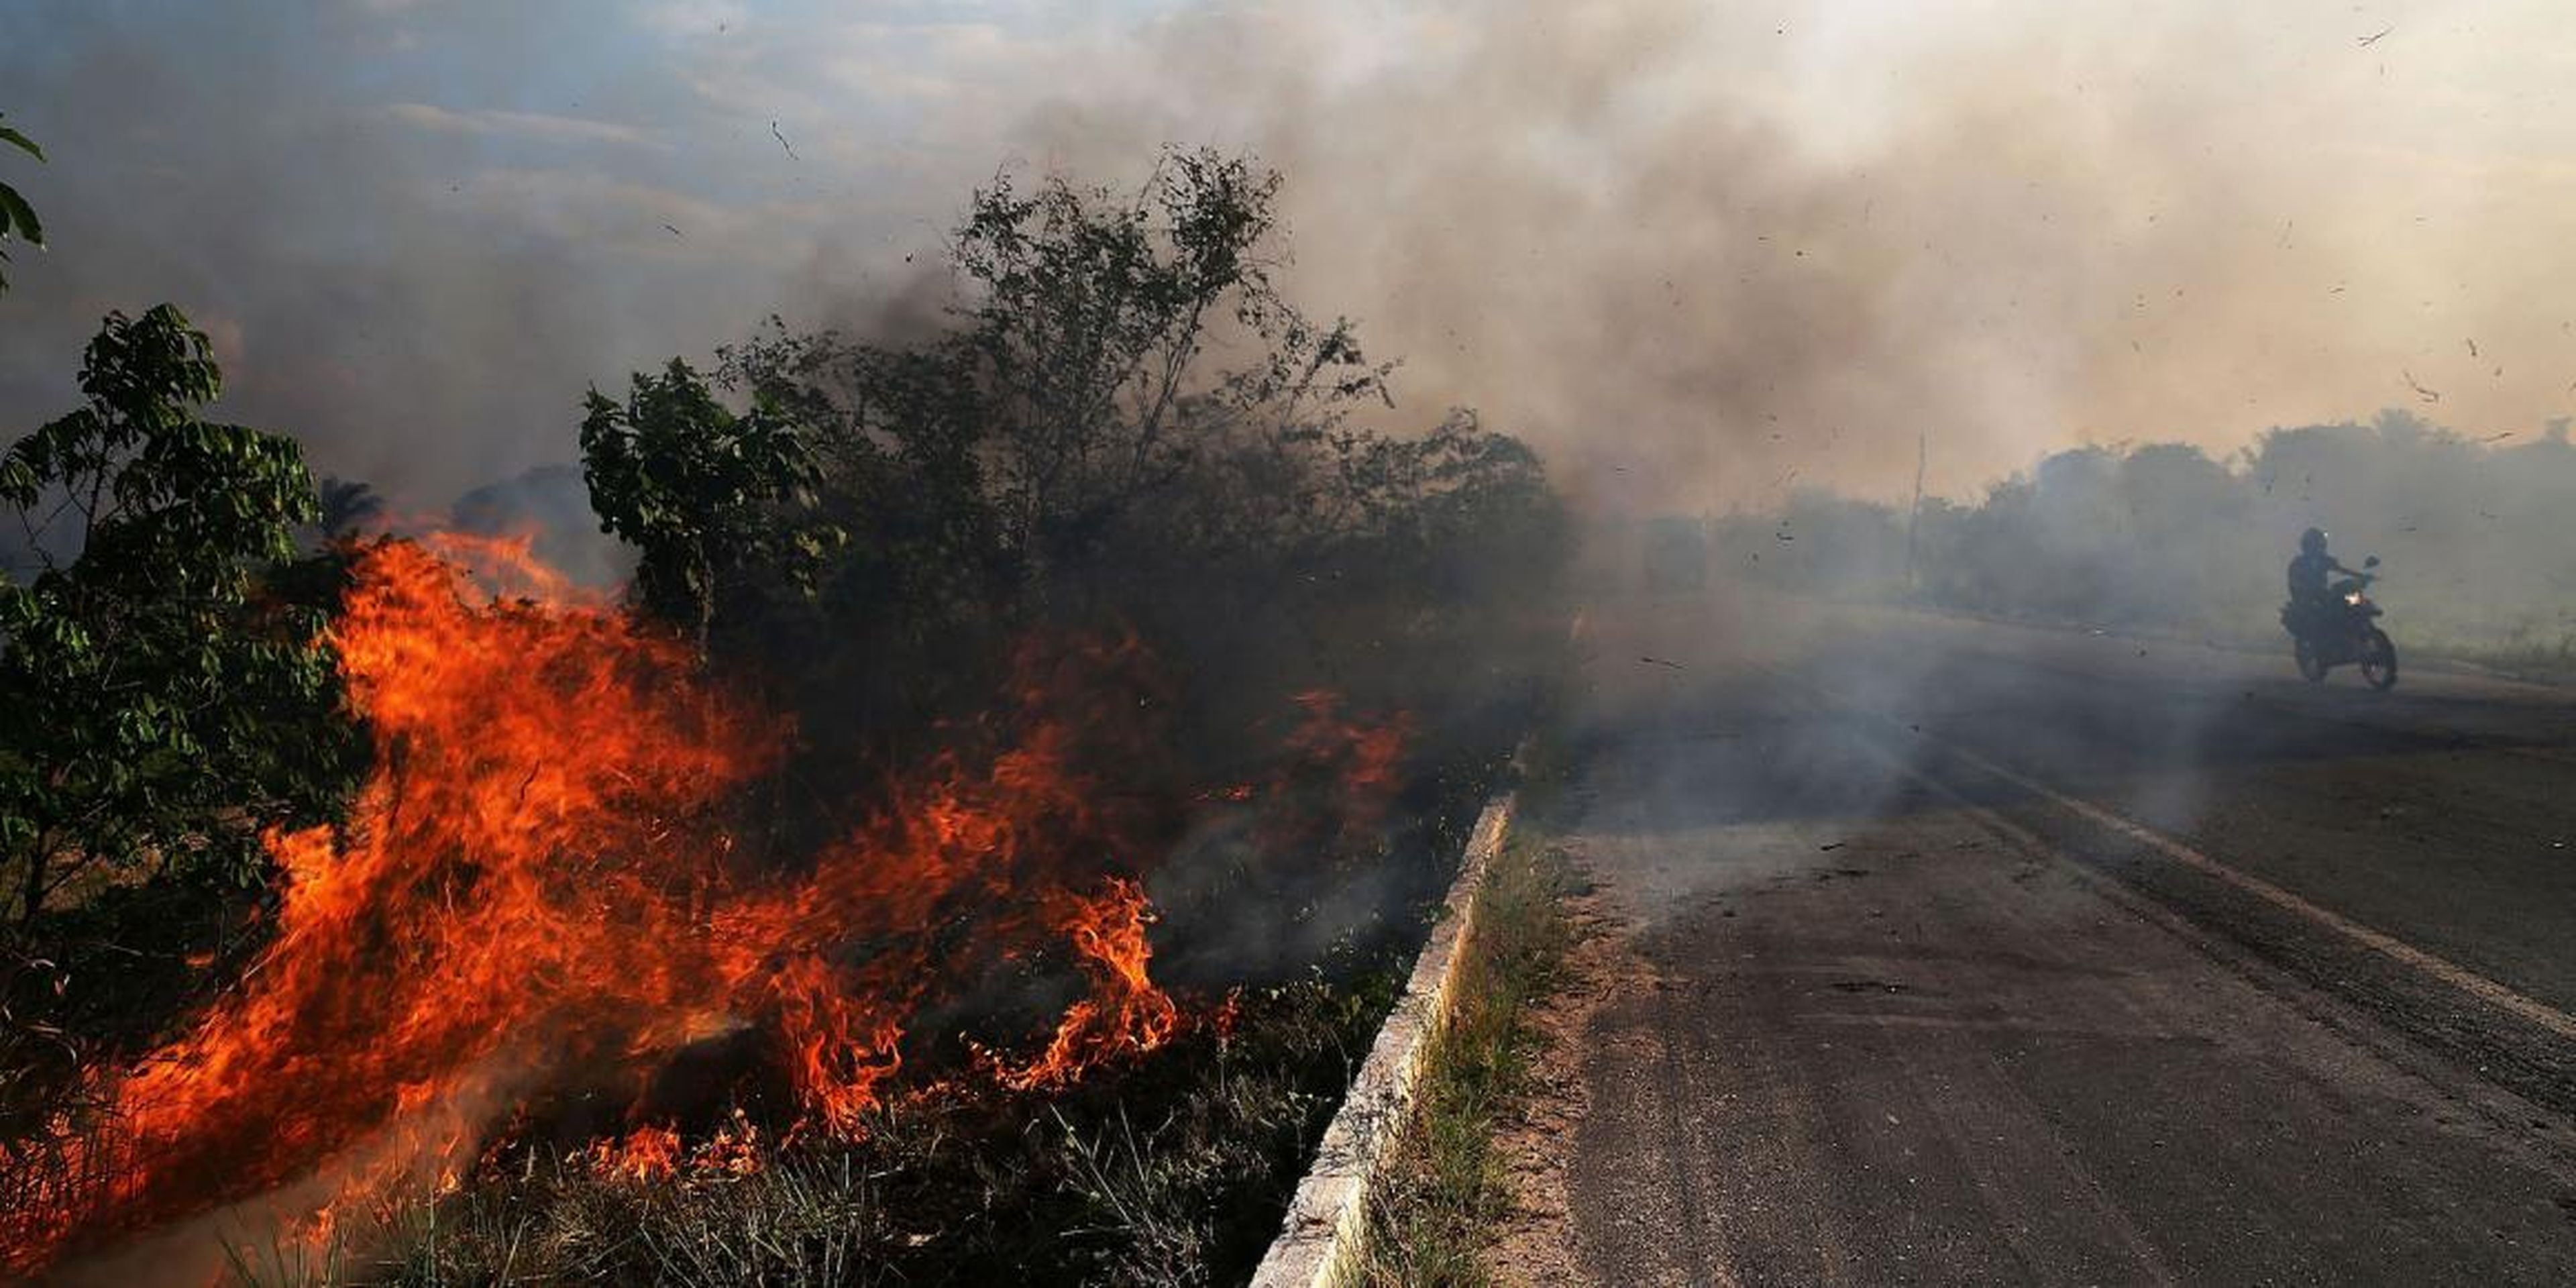 A fire in a deforested section of the Amazon basin on November 23, 2014, in Ze Doca, Brazil.